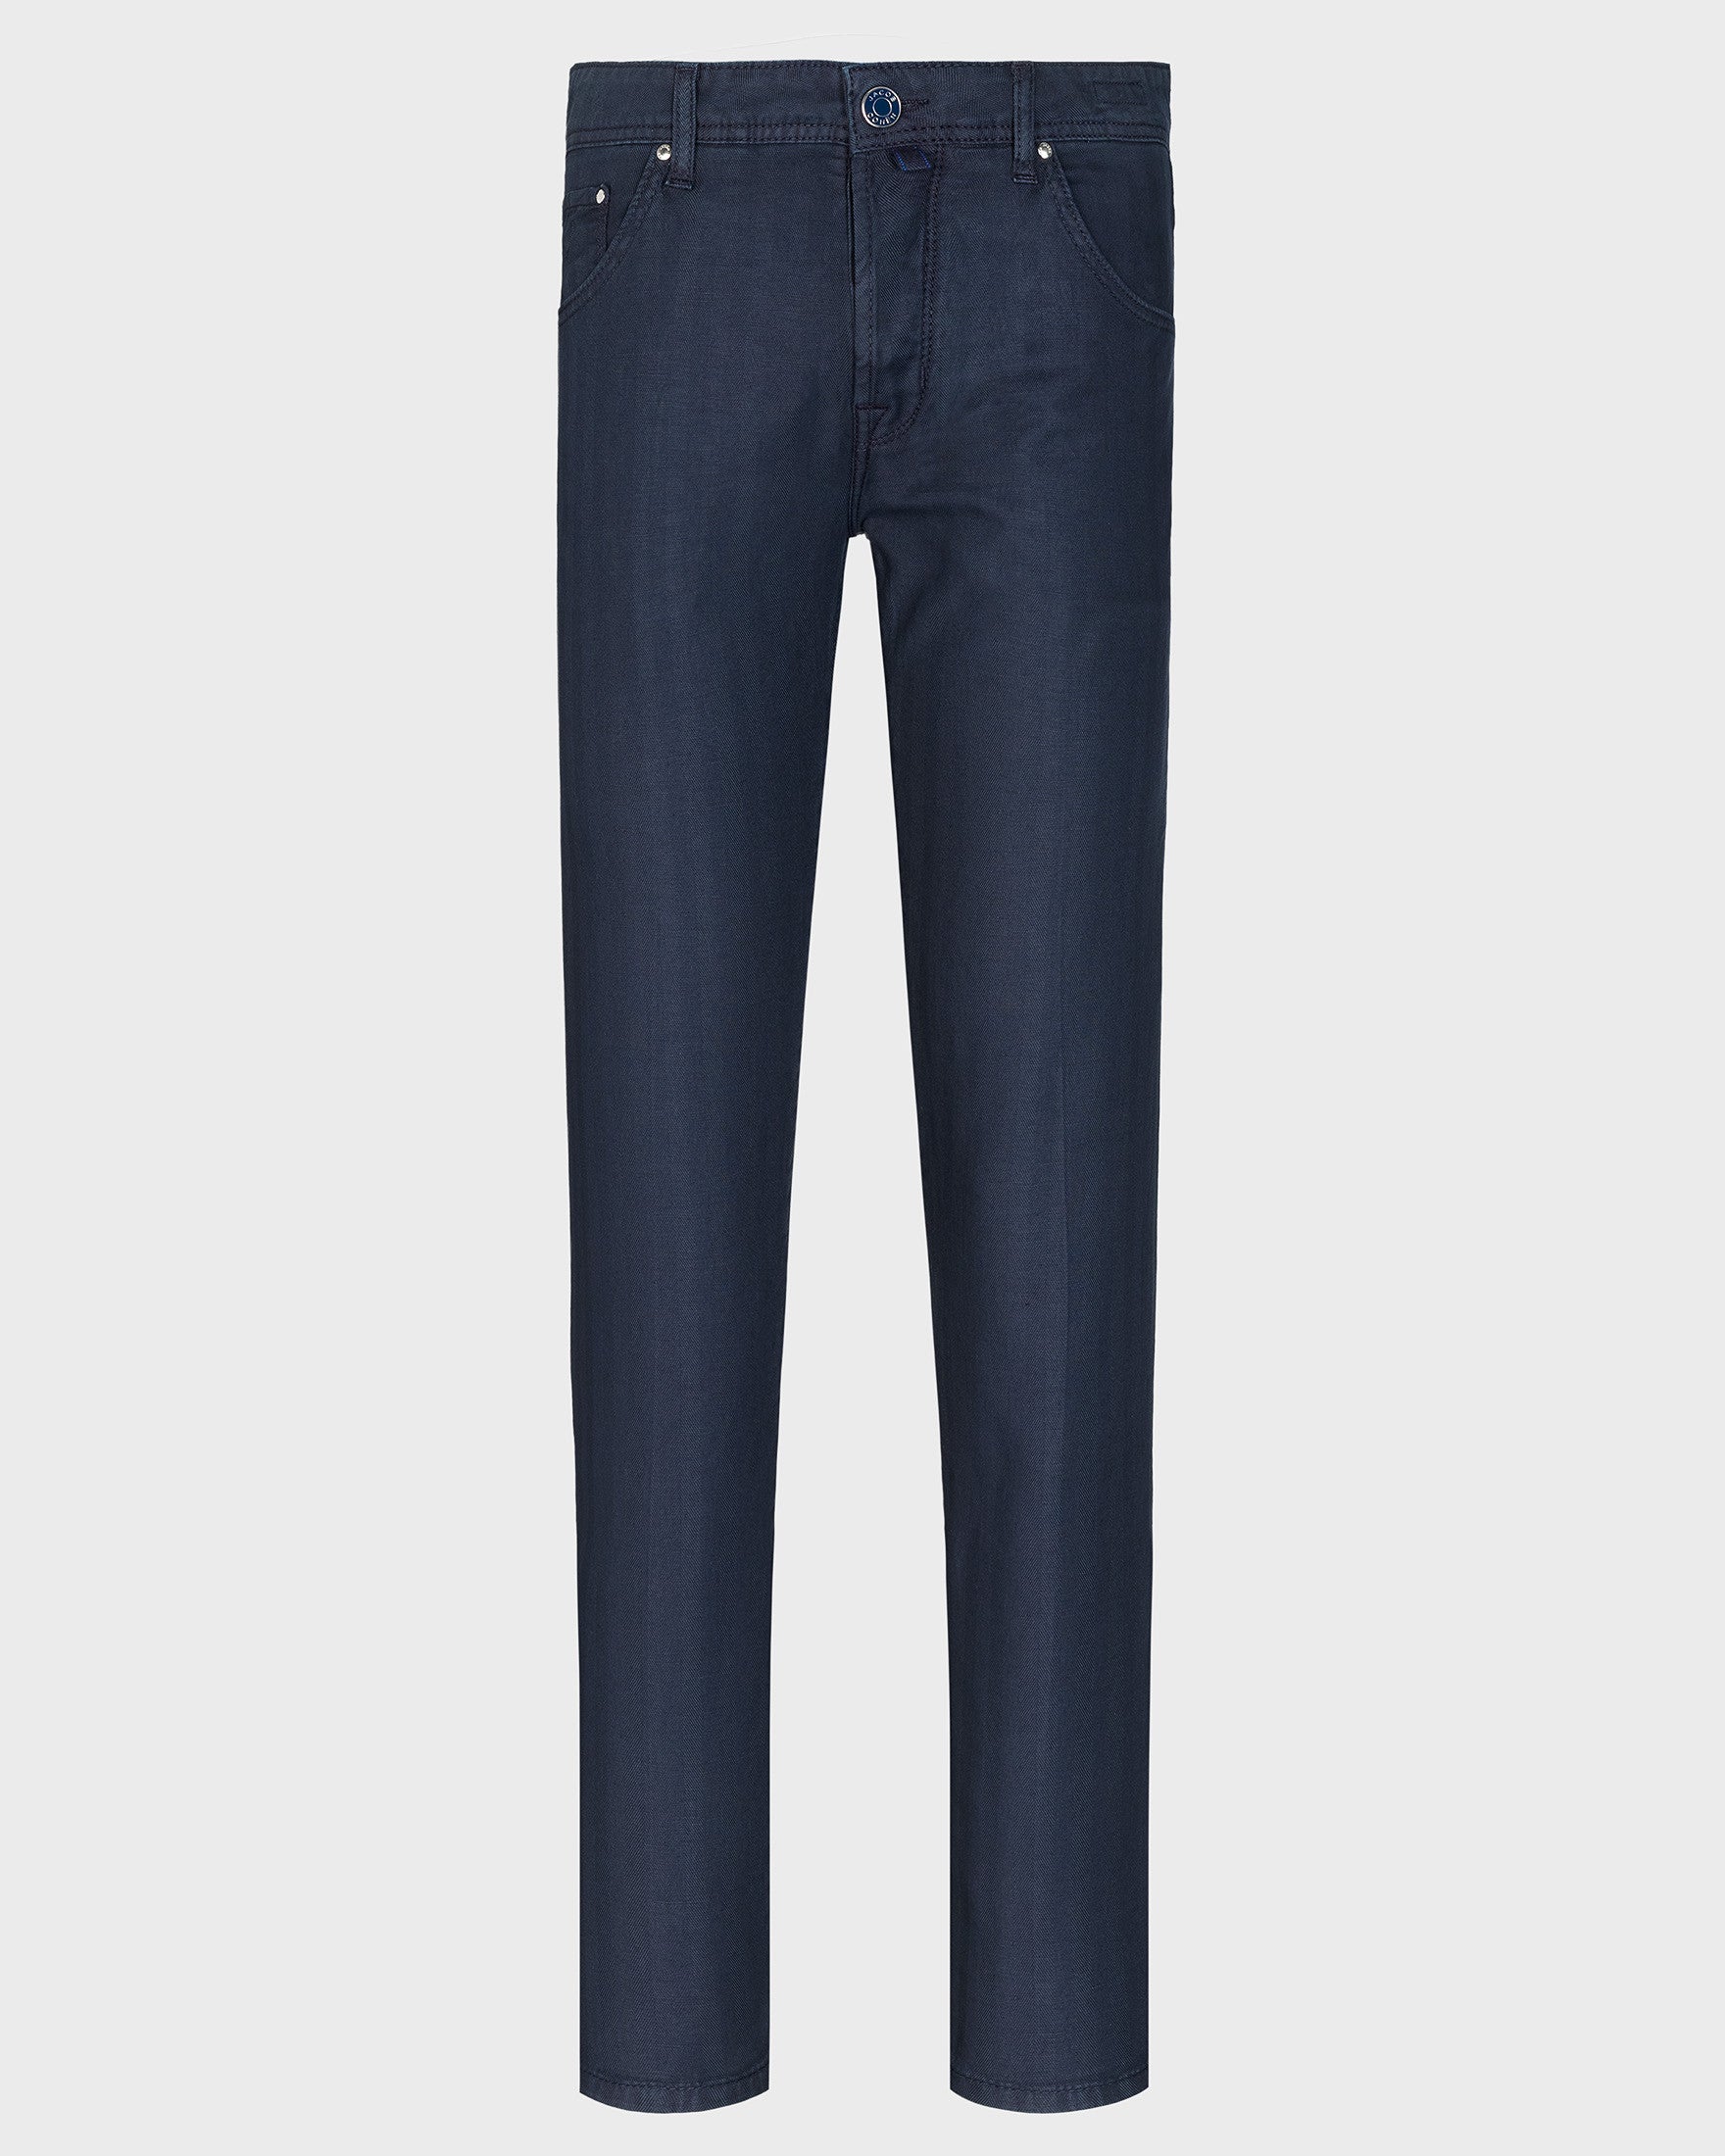 SCOTT CROPPED PANTS IN NAVY BLUE COTTON AND LINEN HERRINGBONE